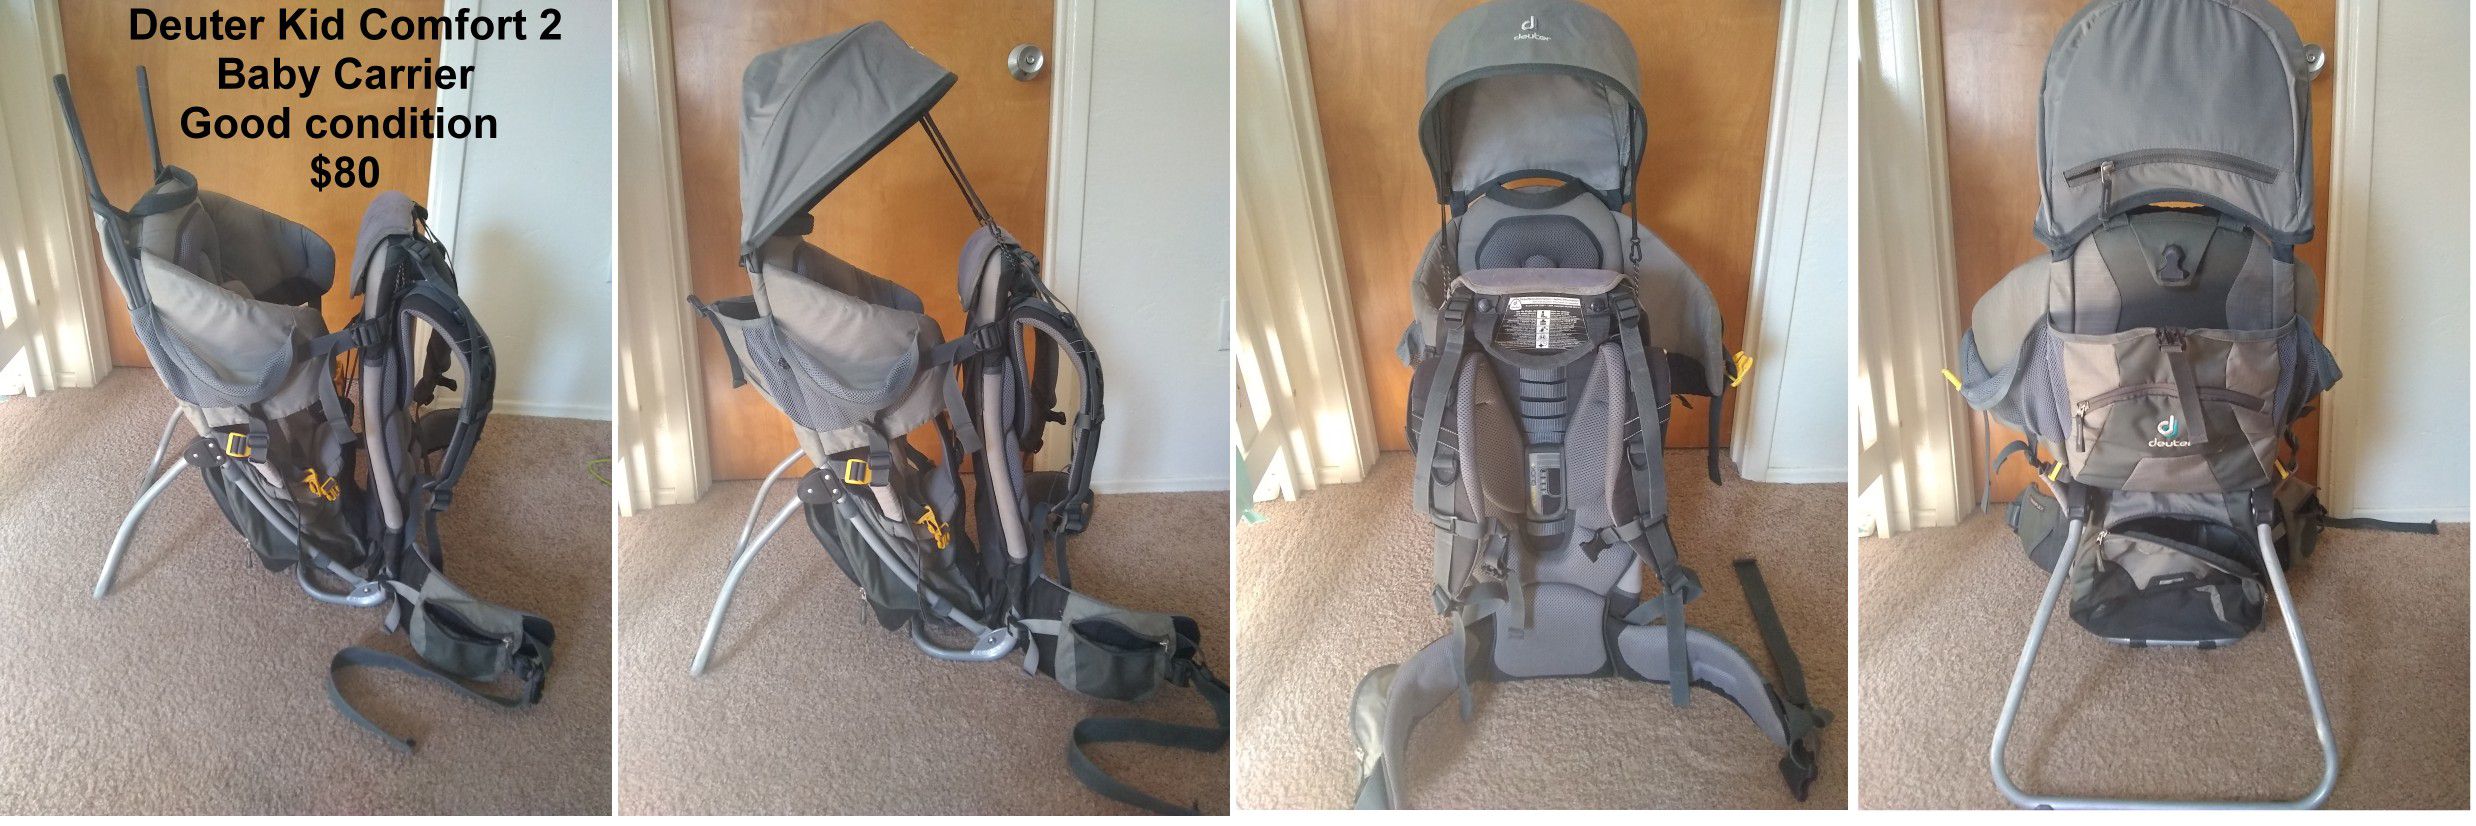 Hiking baby carrier